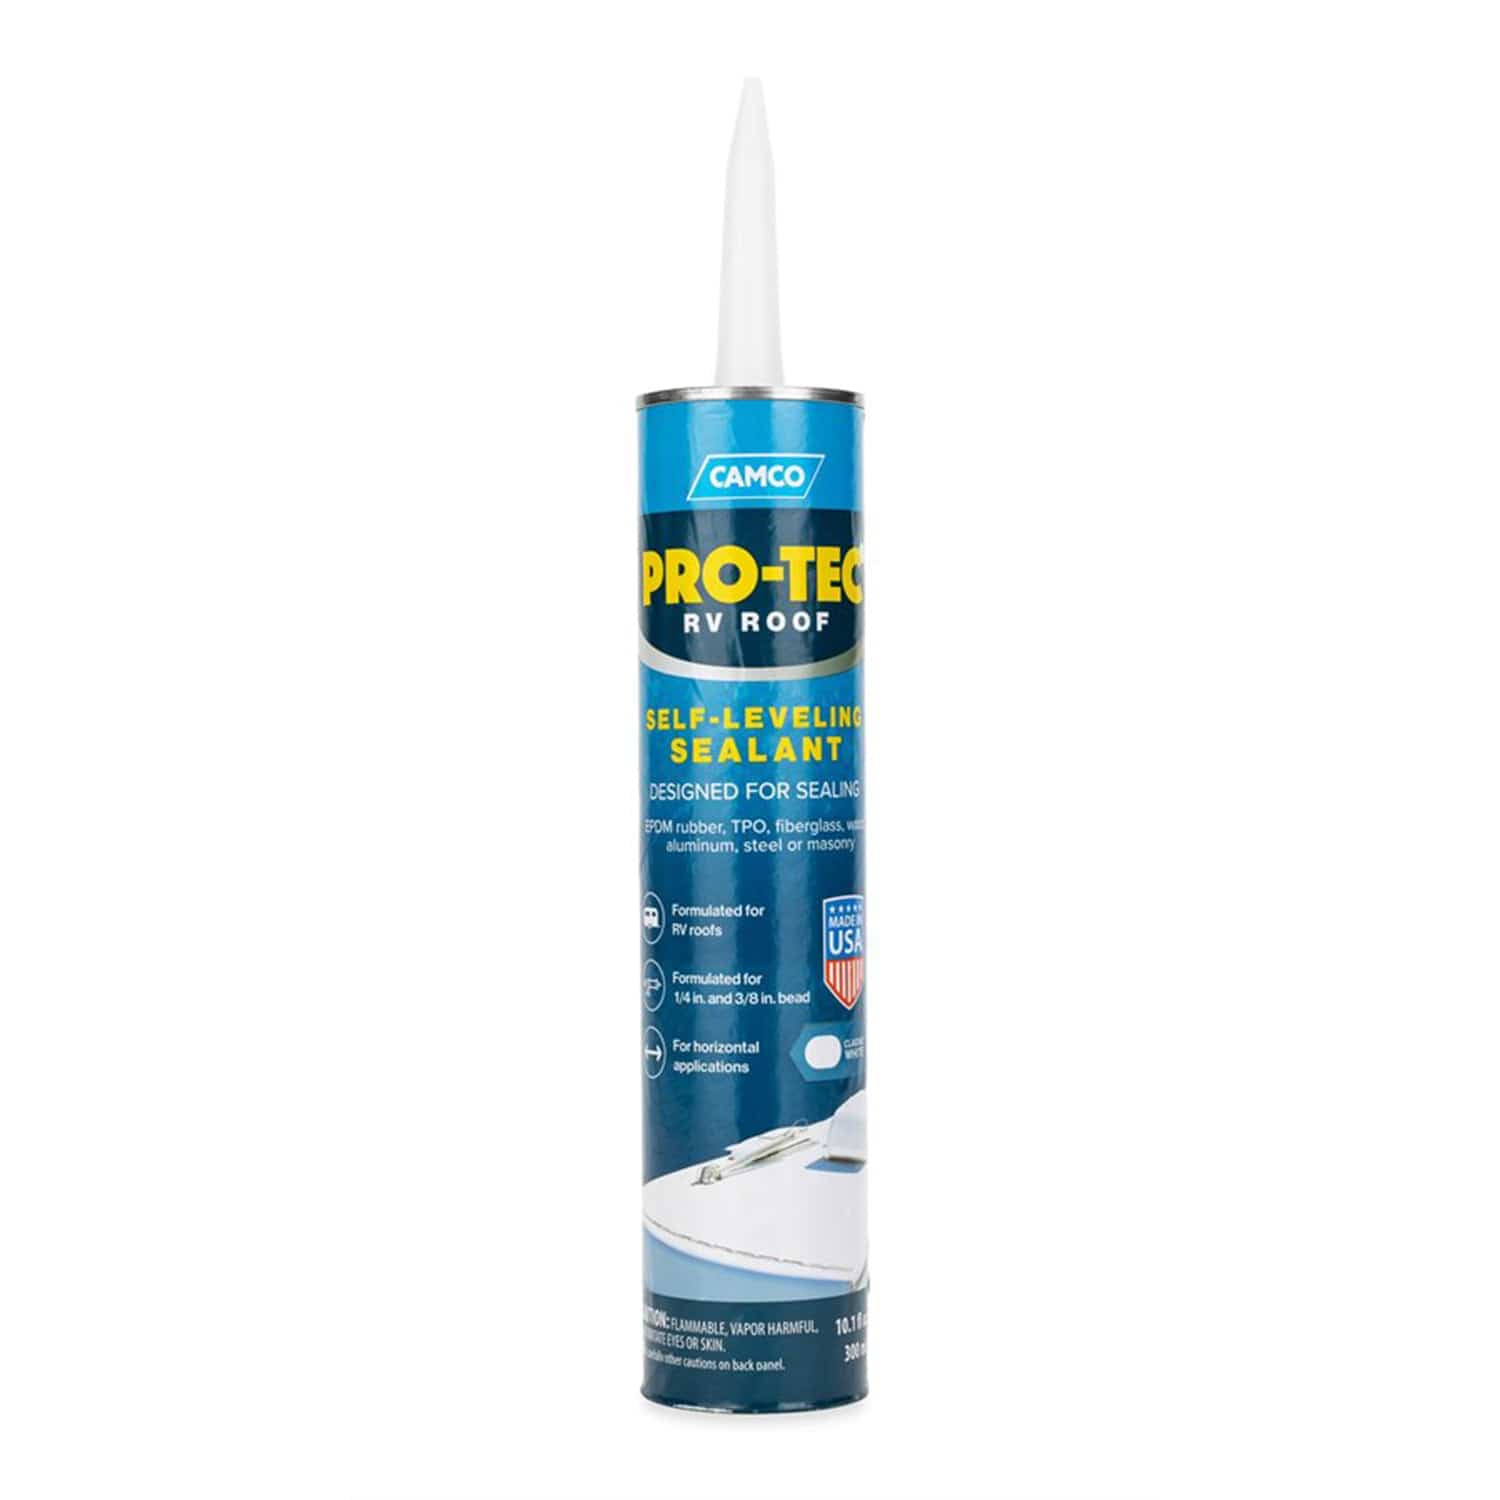 Camco 41464 Pro Tec Self-Leveling RV Roof Sealant - White